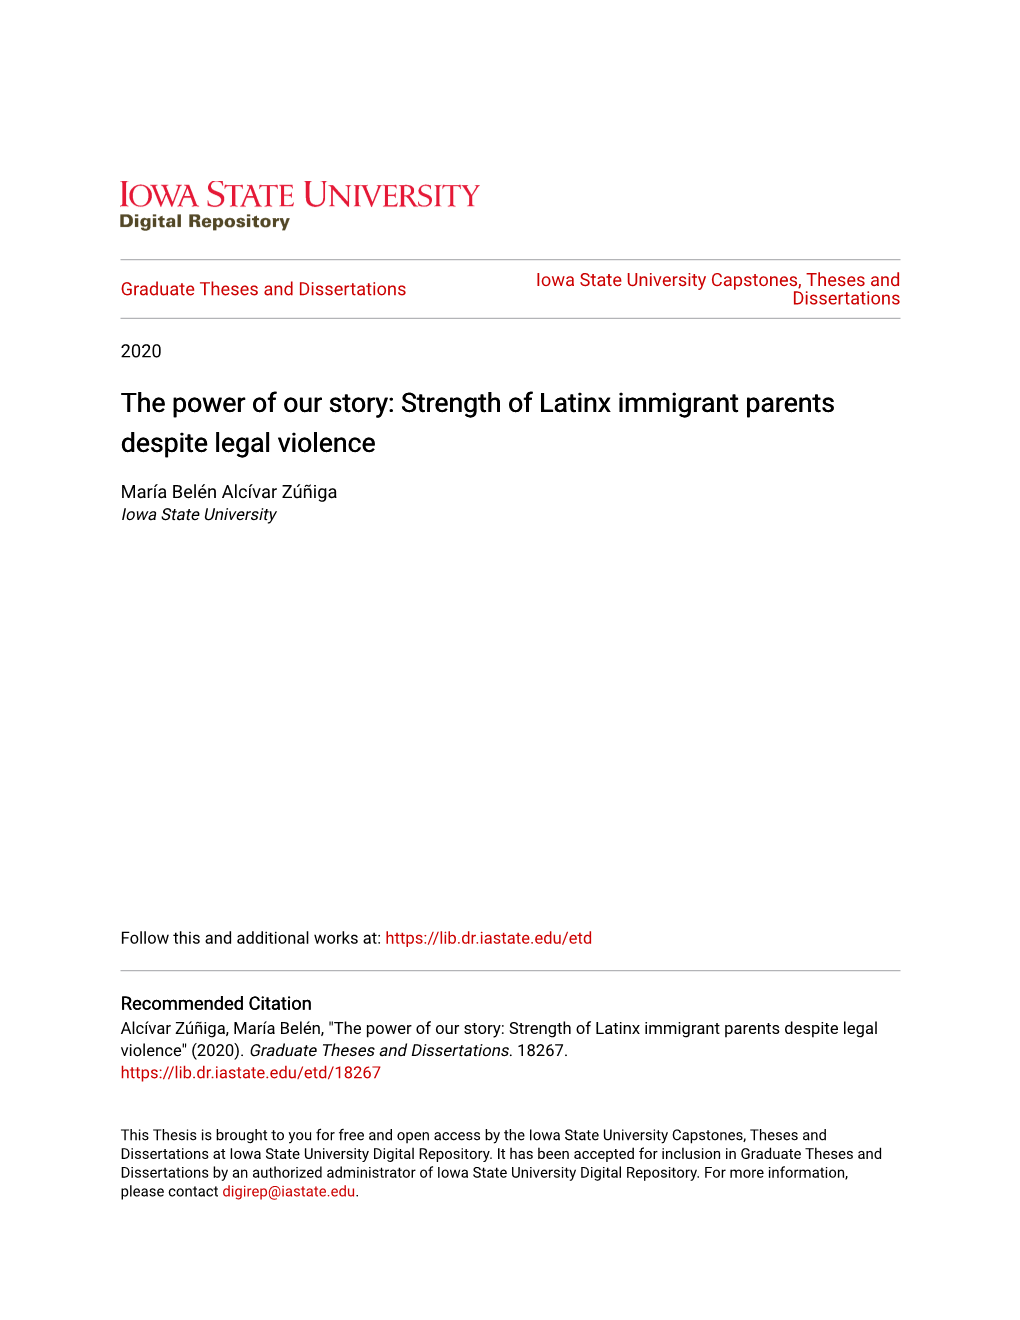 The Power of Our Story: Strength of Latinx Immigrant Parents Despite Legal Violence